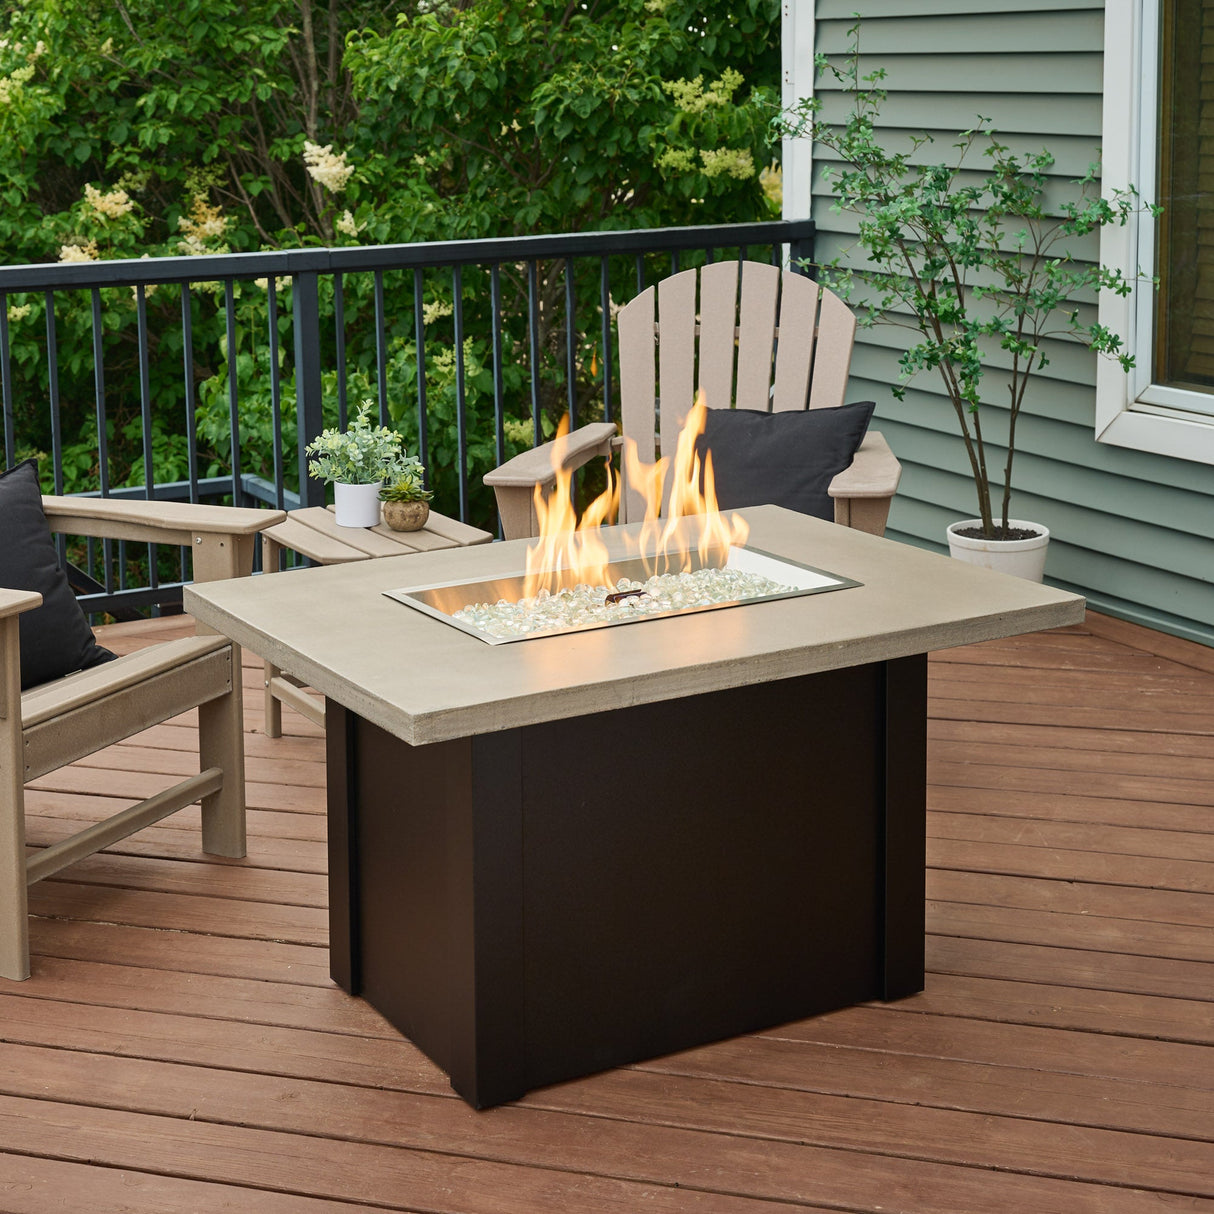 A large flame coming from the burner of a Havenwood Rectangular Gas Fire Pit Table